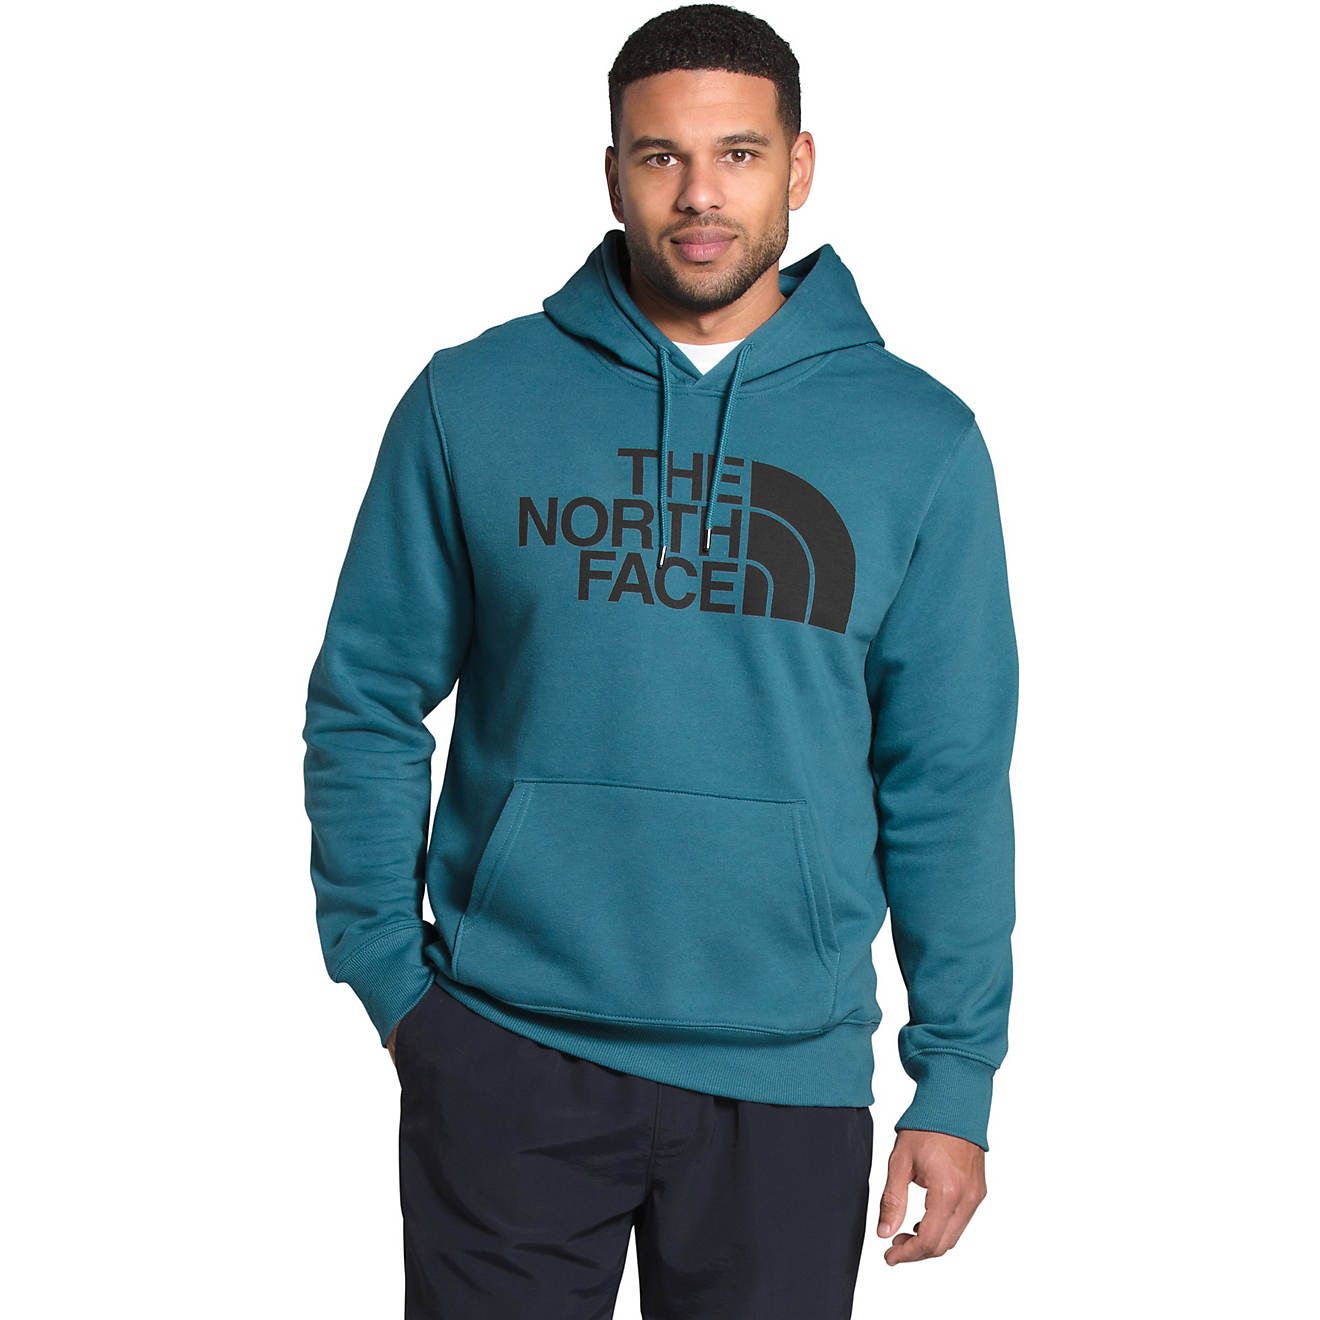 The North Face Men's Half-Dome Pullover Hoodie | Academy Sports + Outdoor Affiliate